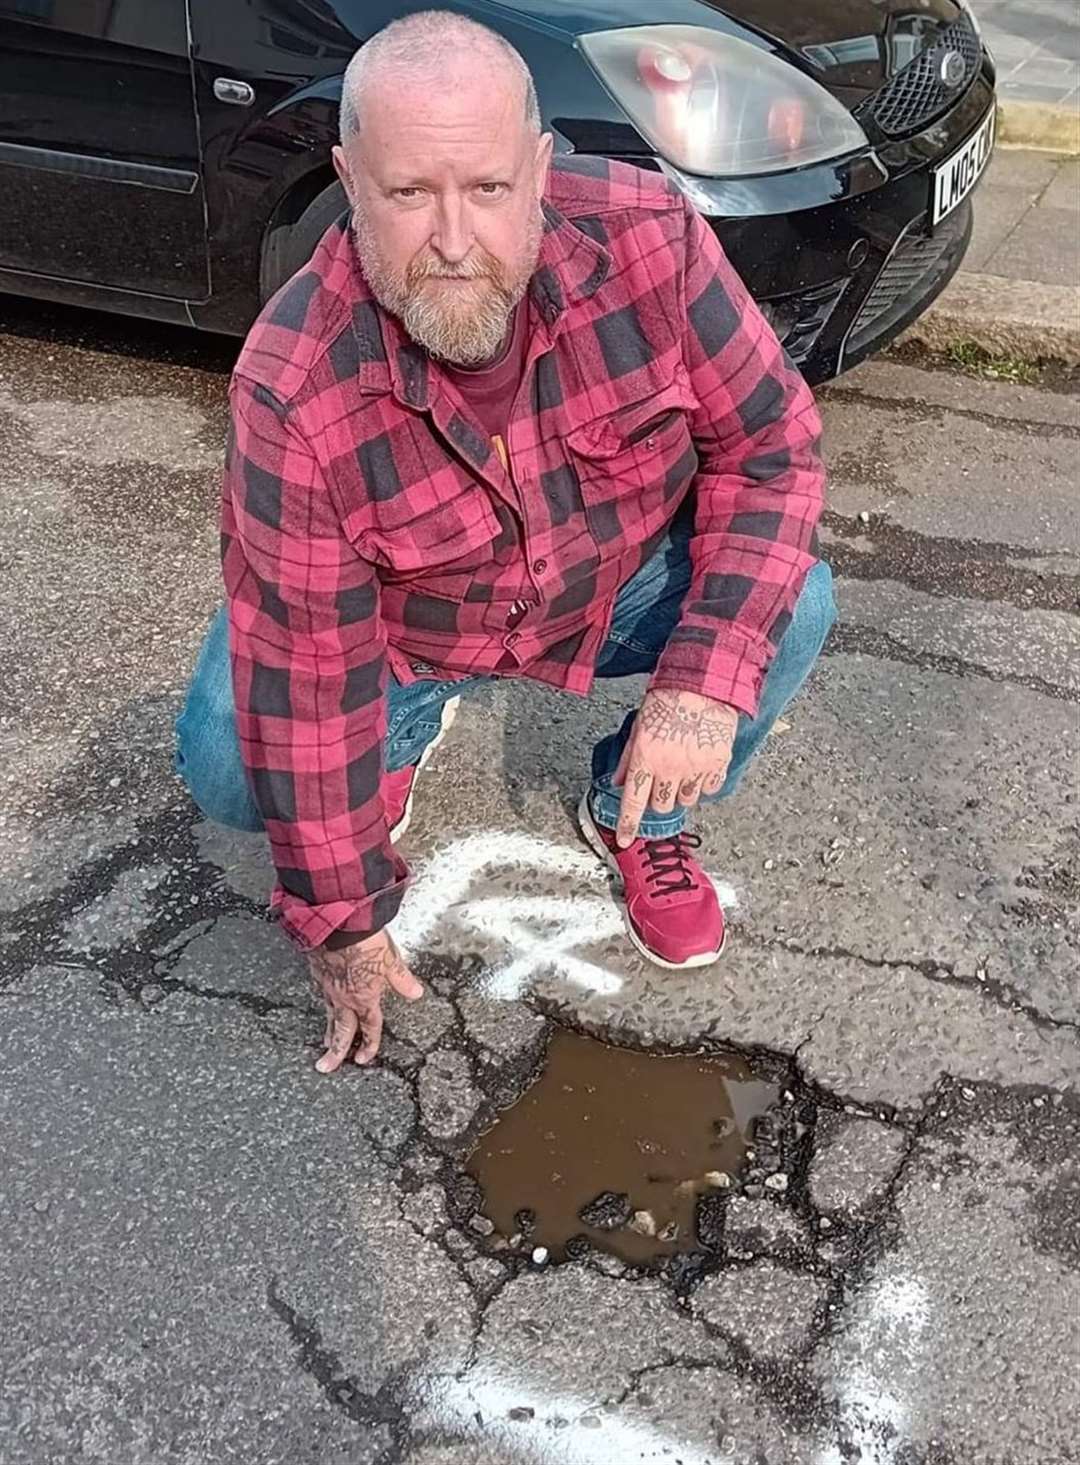 Ian Maggs, 58, has vowed to fill the potholes in Cowper Road himself if the council do not come to fix them soon